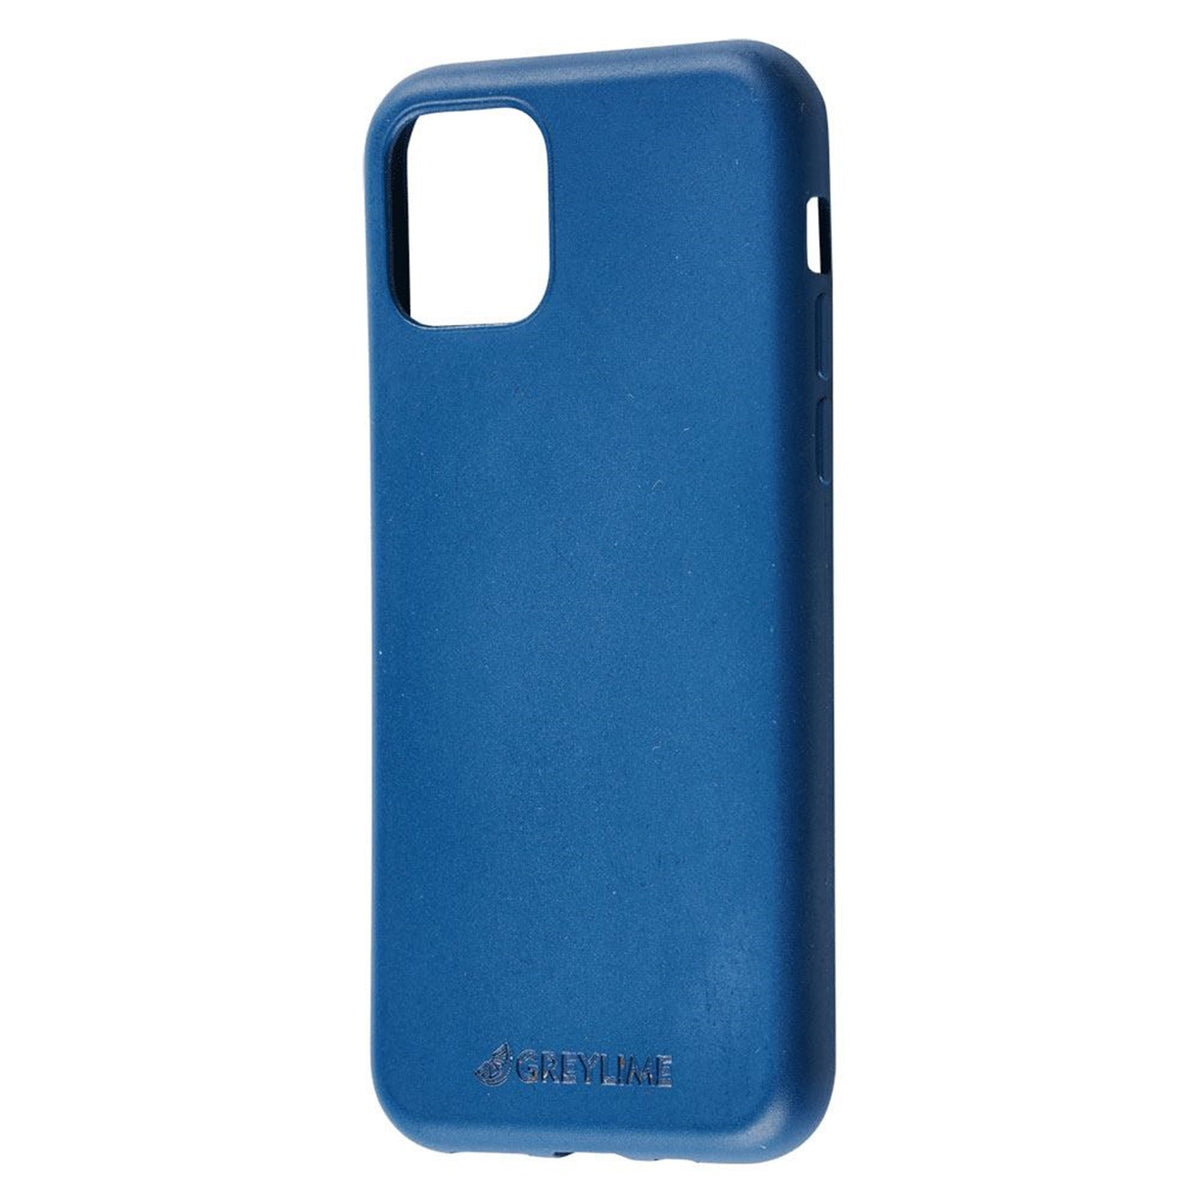 GreyLime-iPhone-11-Pro-Max-biodegradable-cover-Navy-blue-COIP11PM03-V2.jpg